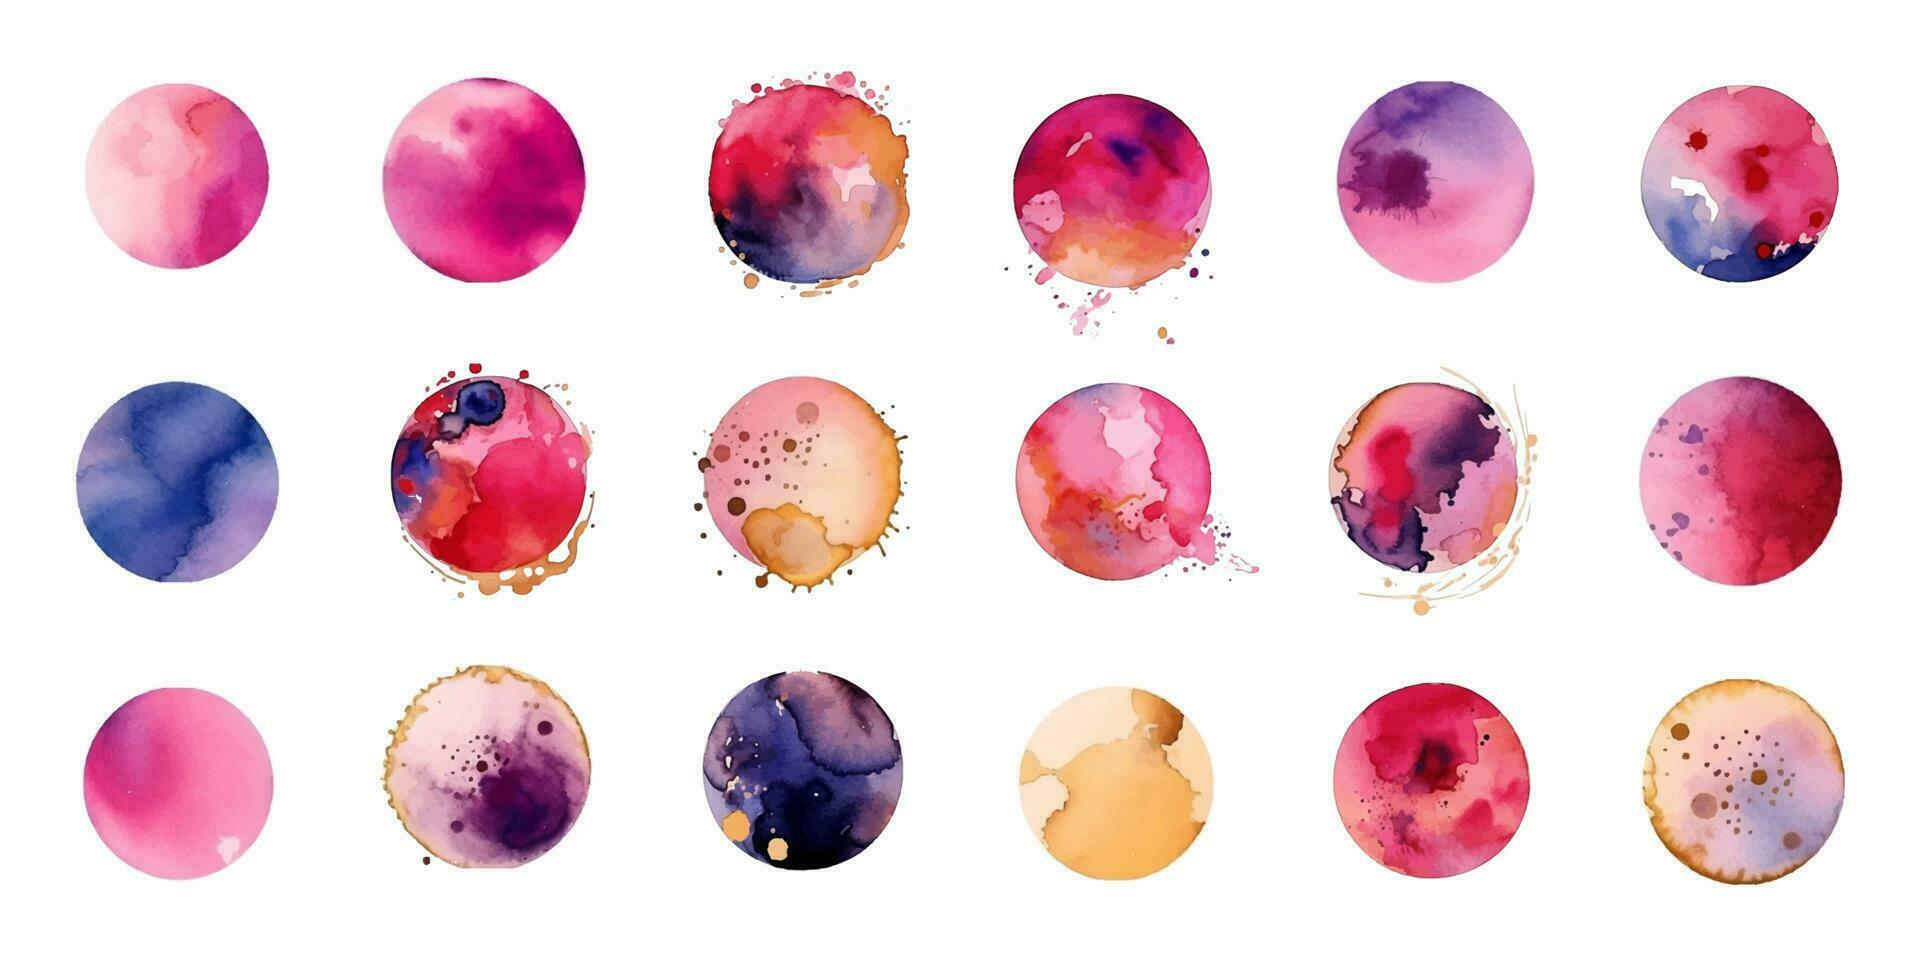 Watercolor stains. Set of colorful watercolor stains. Vector illustration.